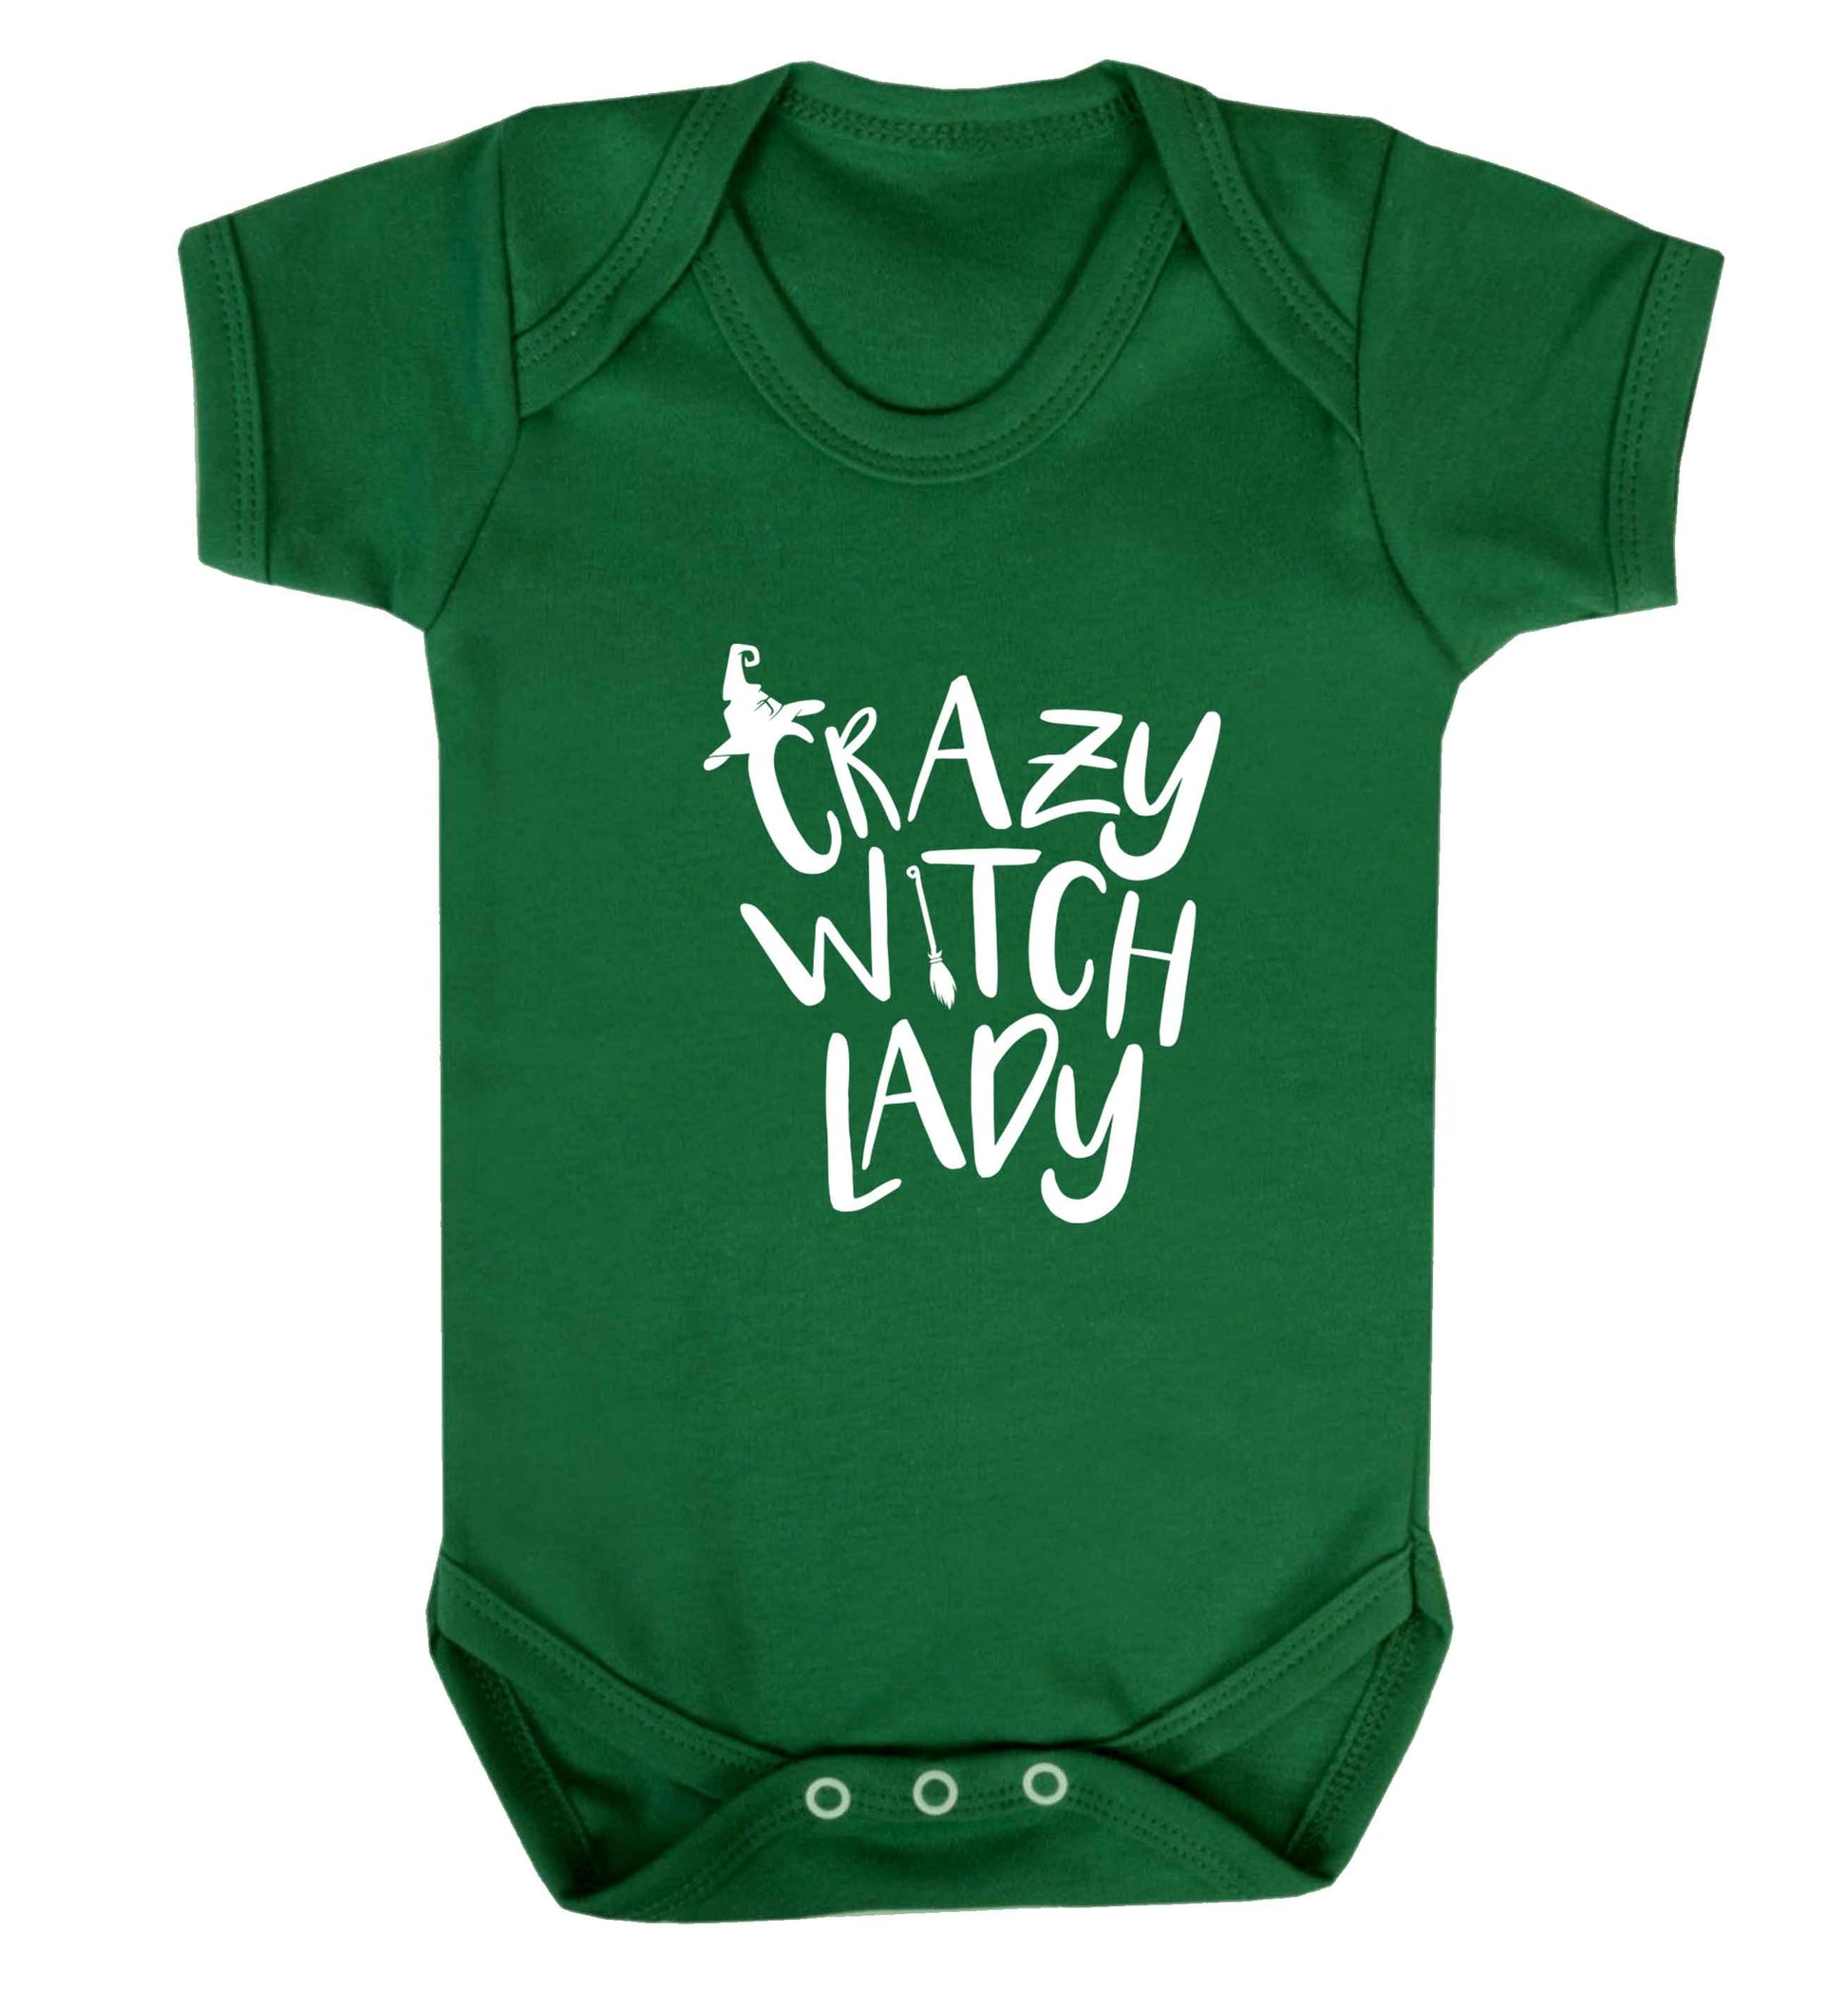 Crazy witch lady baby vest green 18-24 months